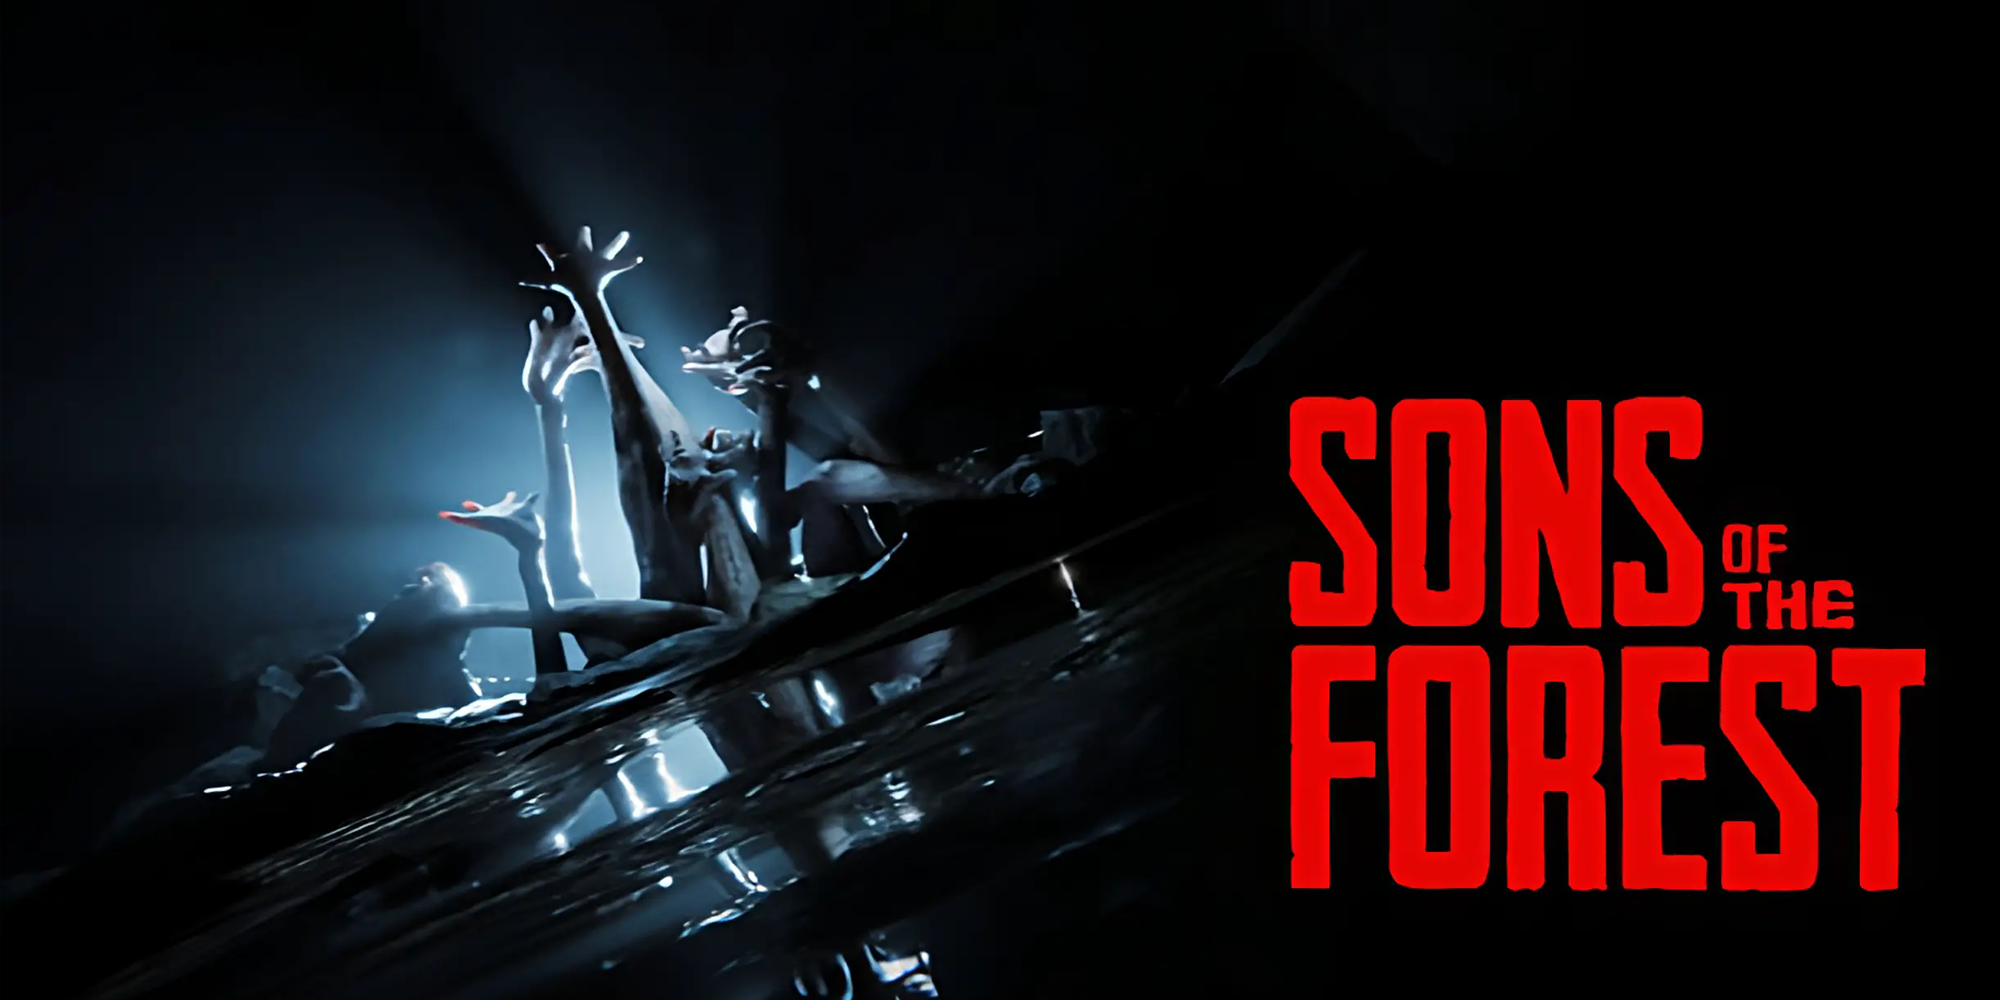 Hands rise from the ground alongside the Sons of the Forest text logo in red.